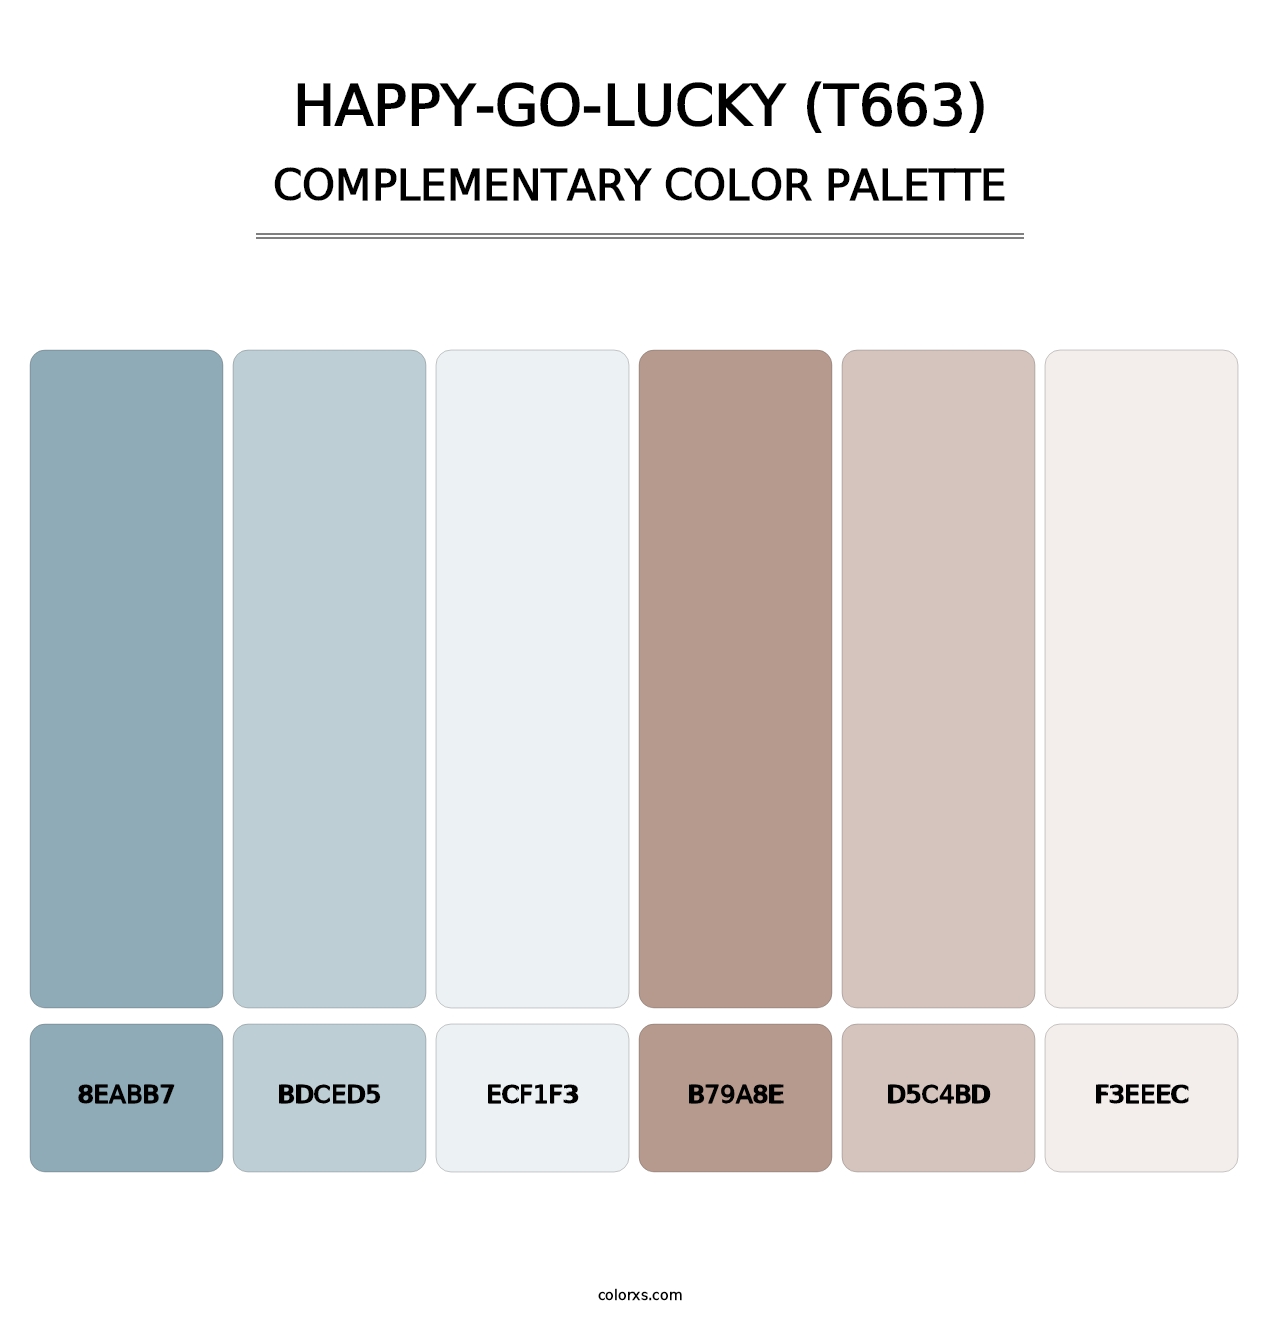 Happy-Go-Lucky (T663) - Complementary Color Palette